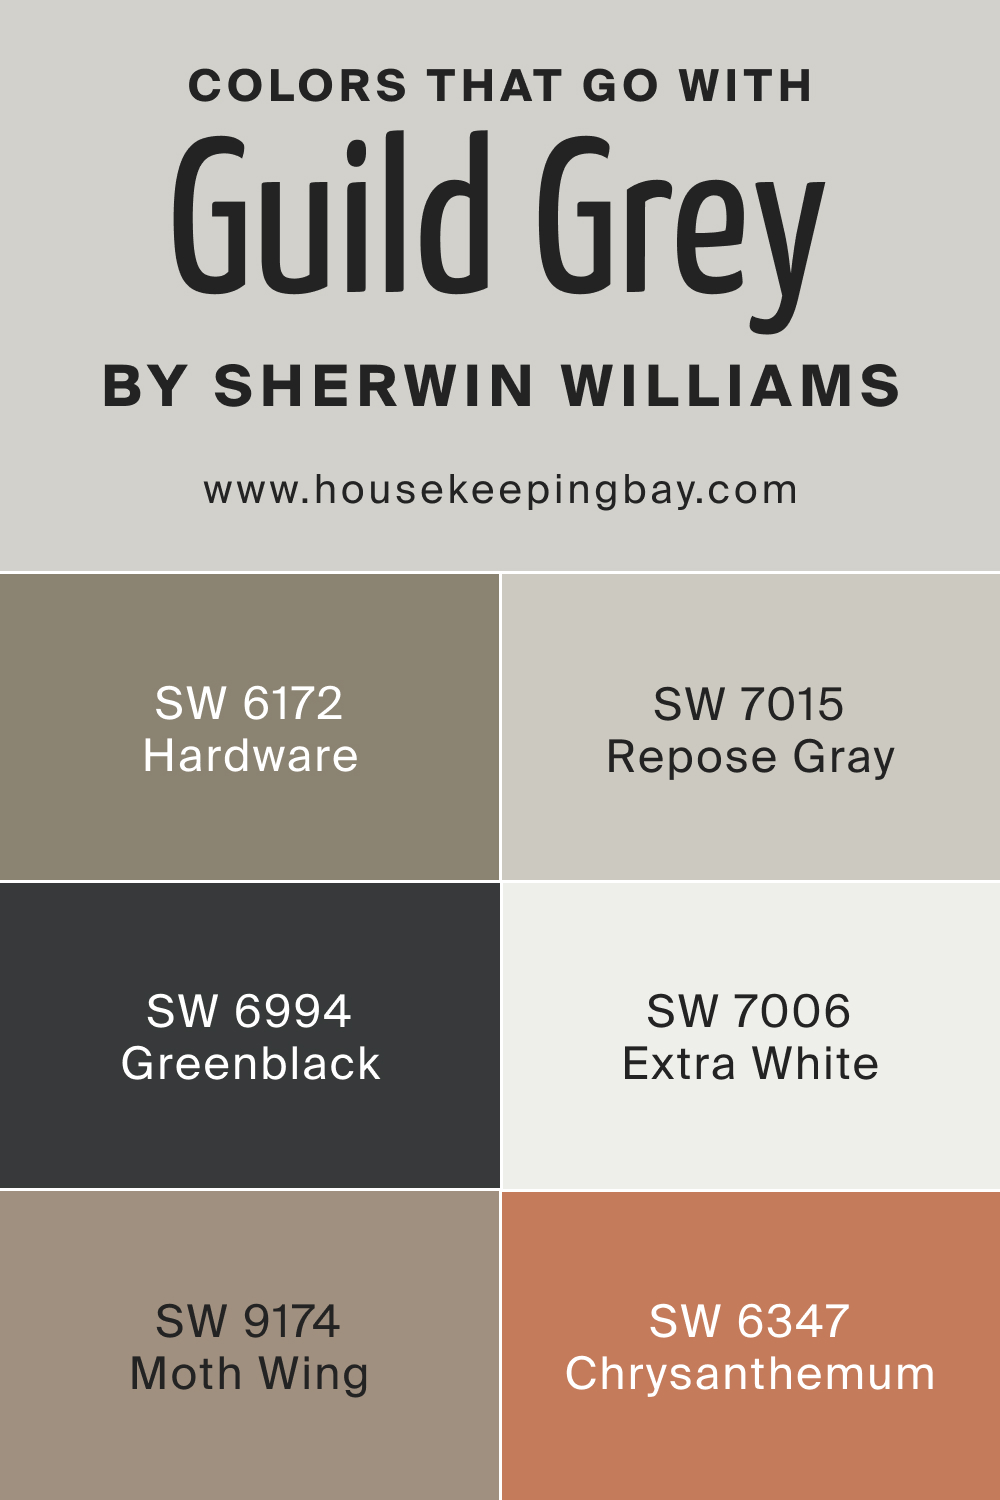 Colors that goes with SW 9561 Guild Grey by Sherwin Williams